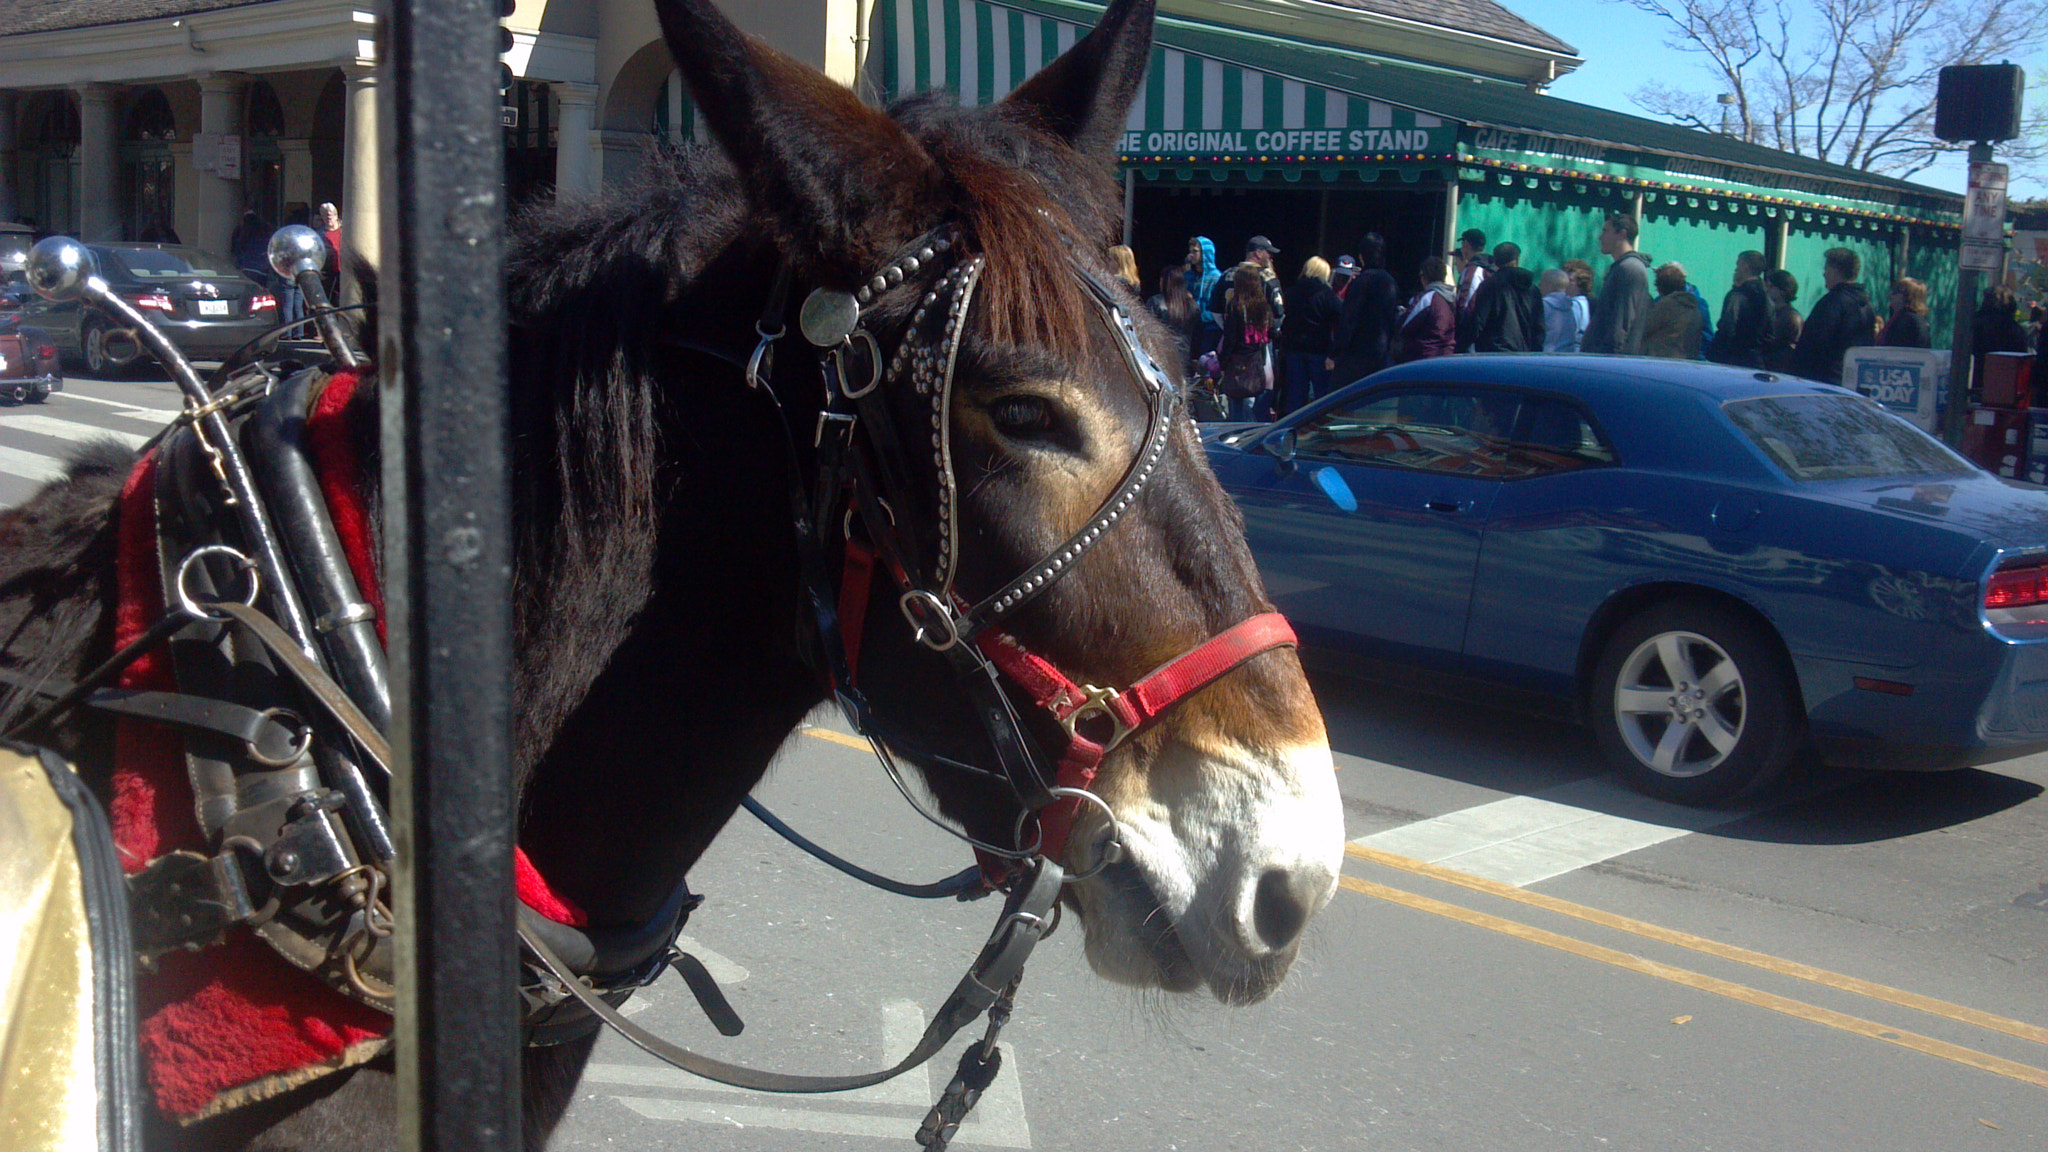 Motorola DROID X2 sample photo. Horse carriage ride & beignets photography